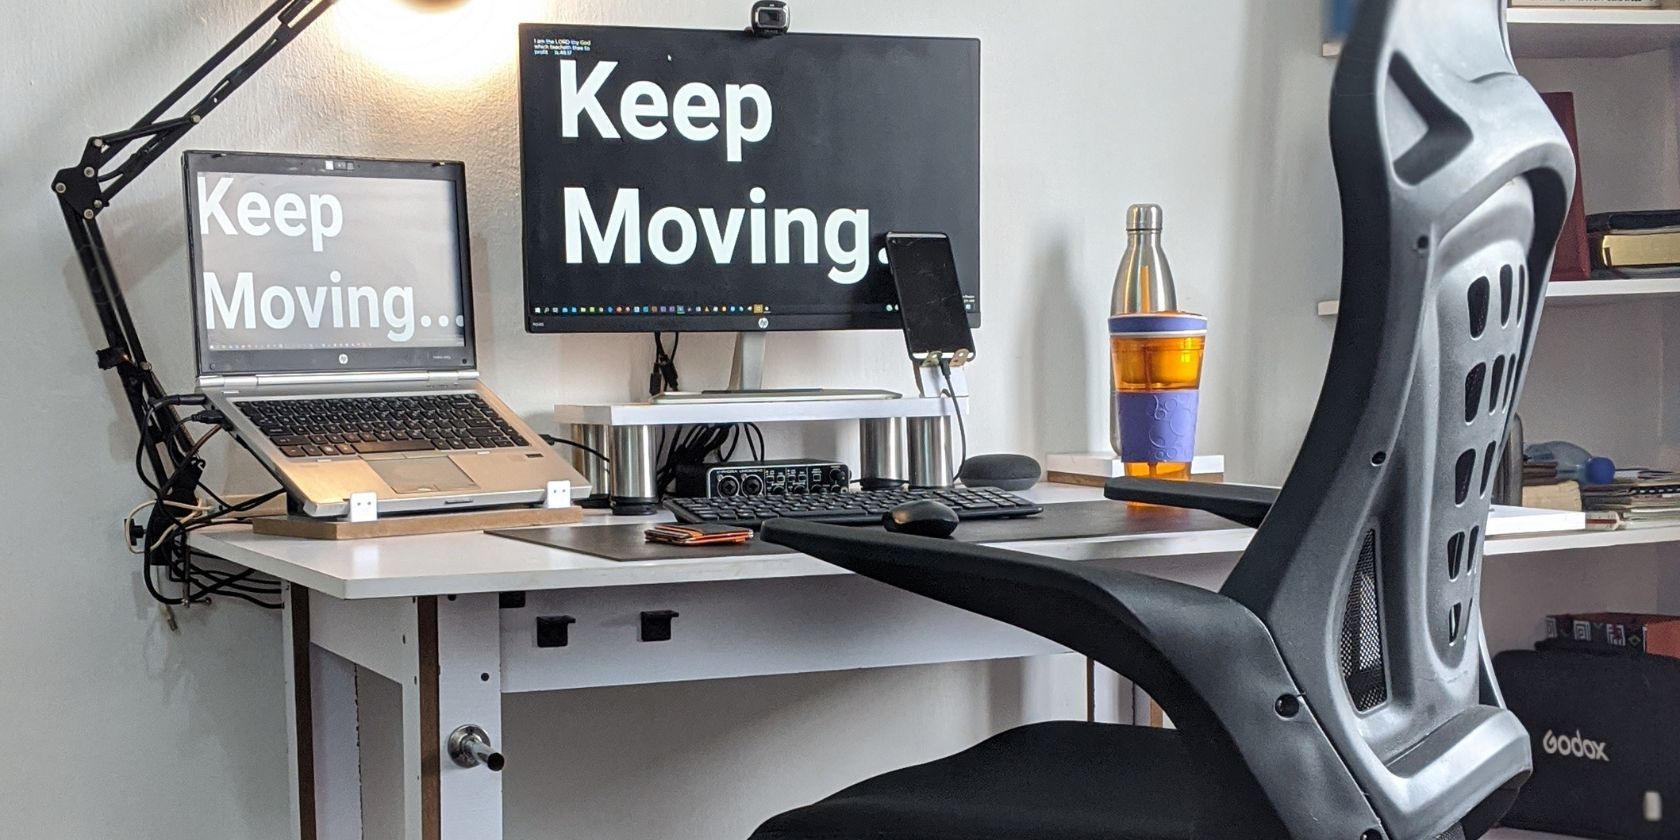 A chair in front of a desk with a monitor saying Keep Moving